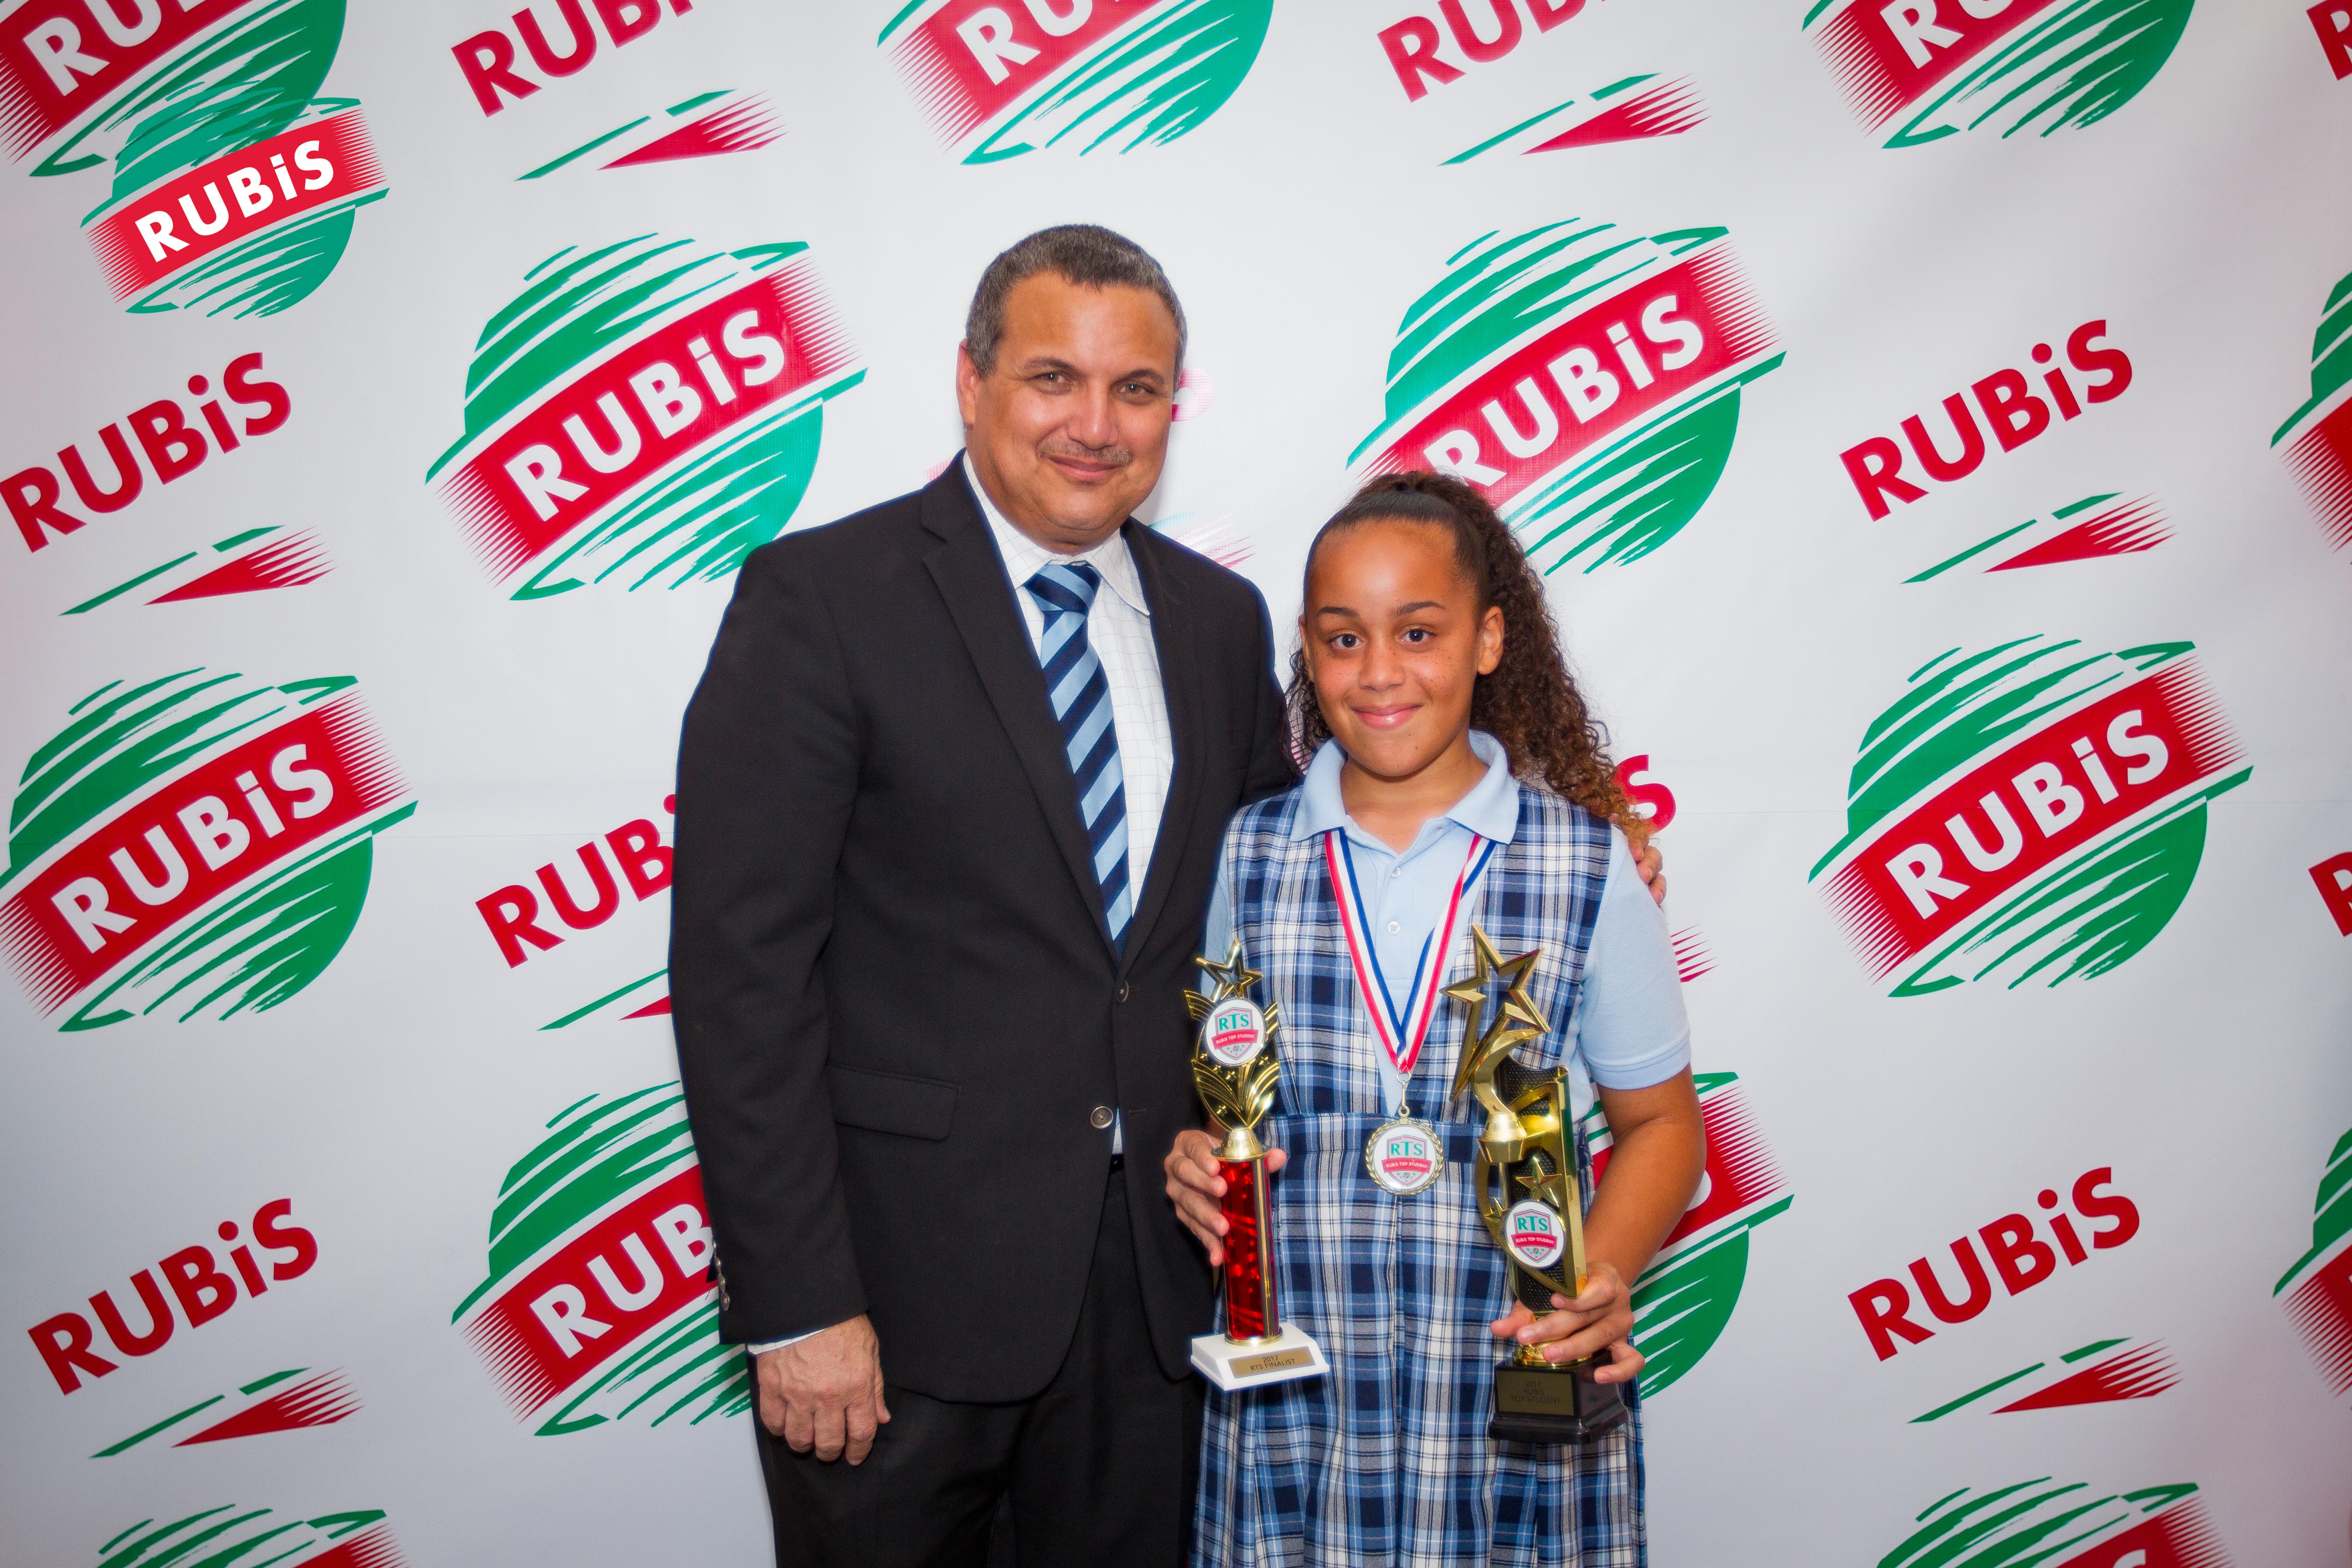 Rubis Top Student trophies